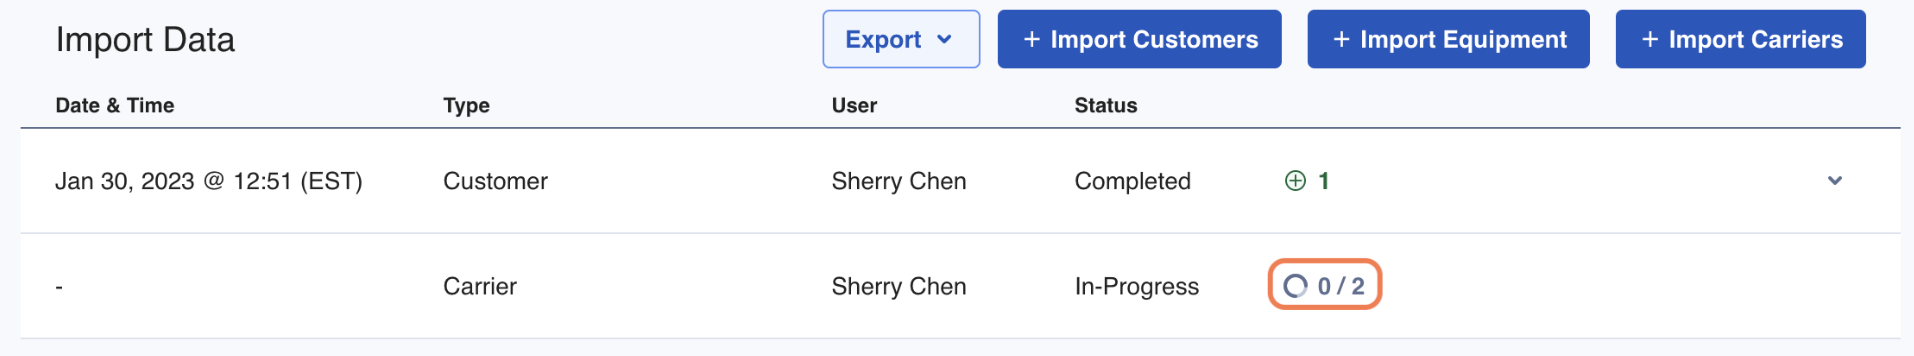 The Import Data page will show the upload progress.